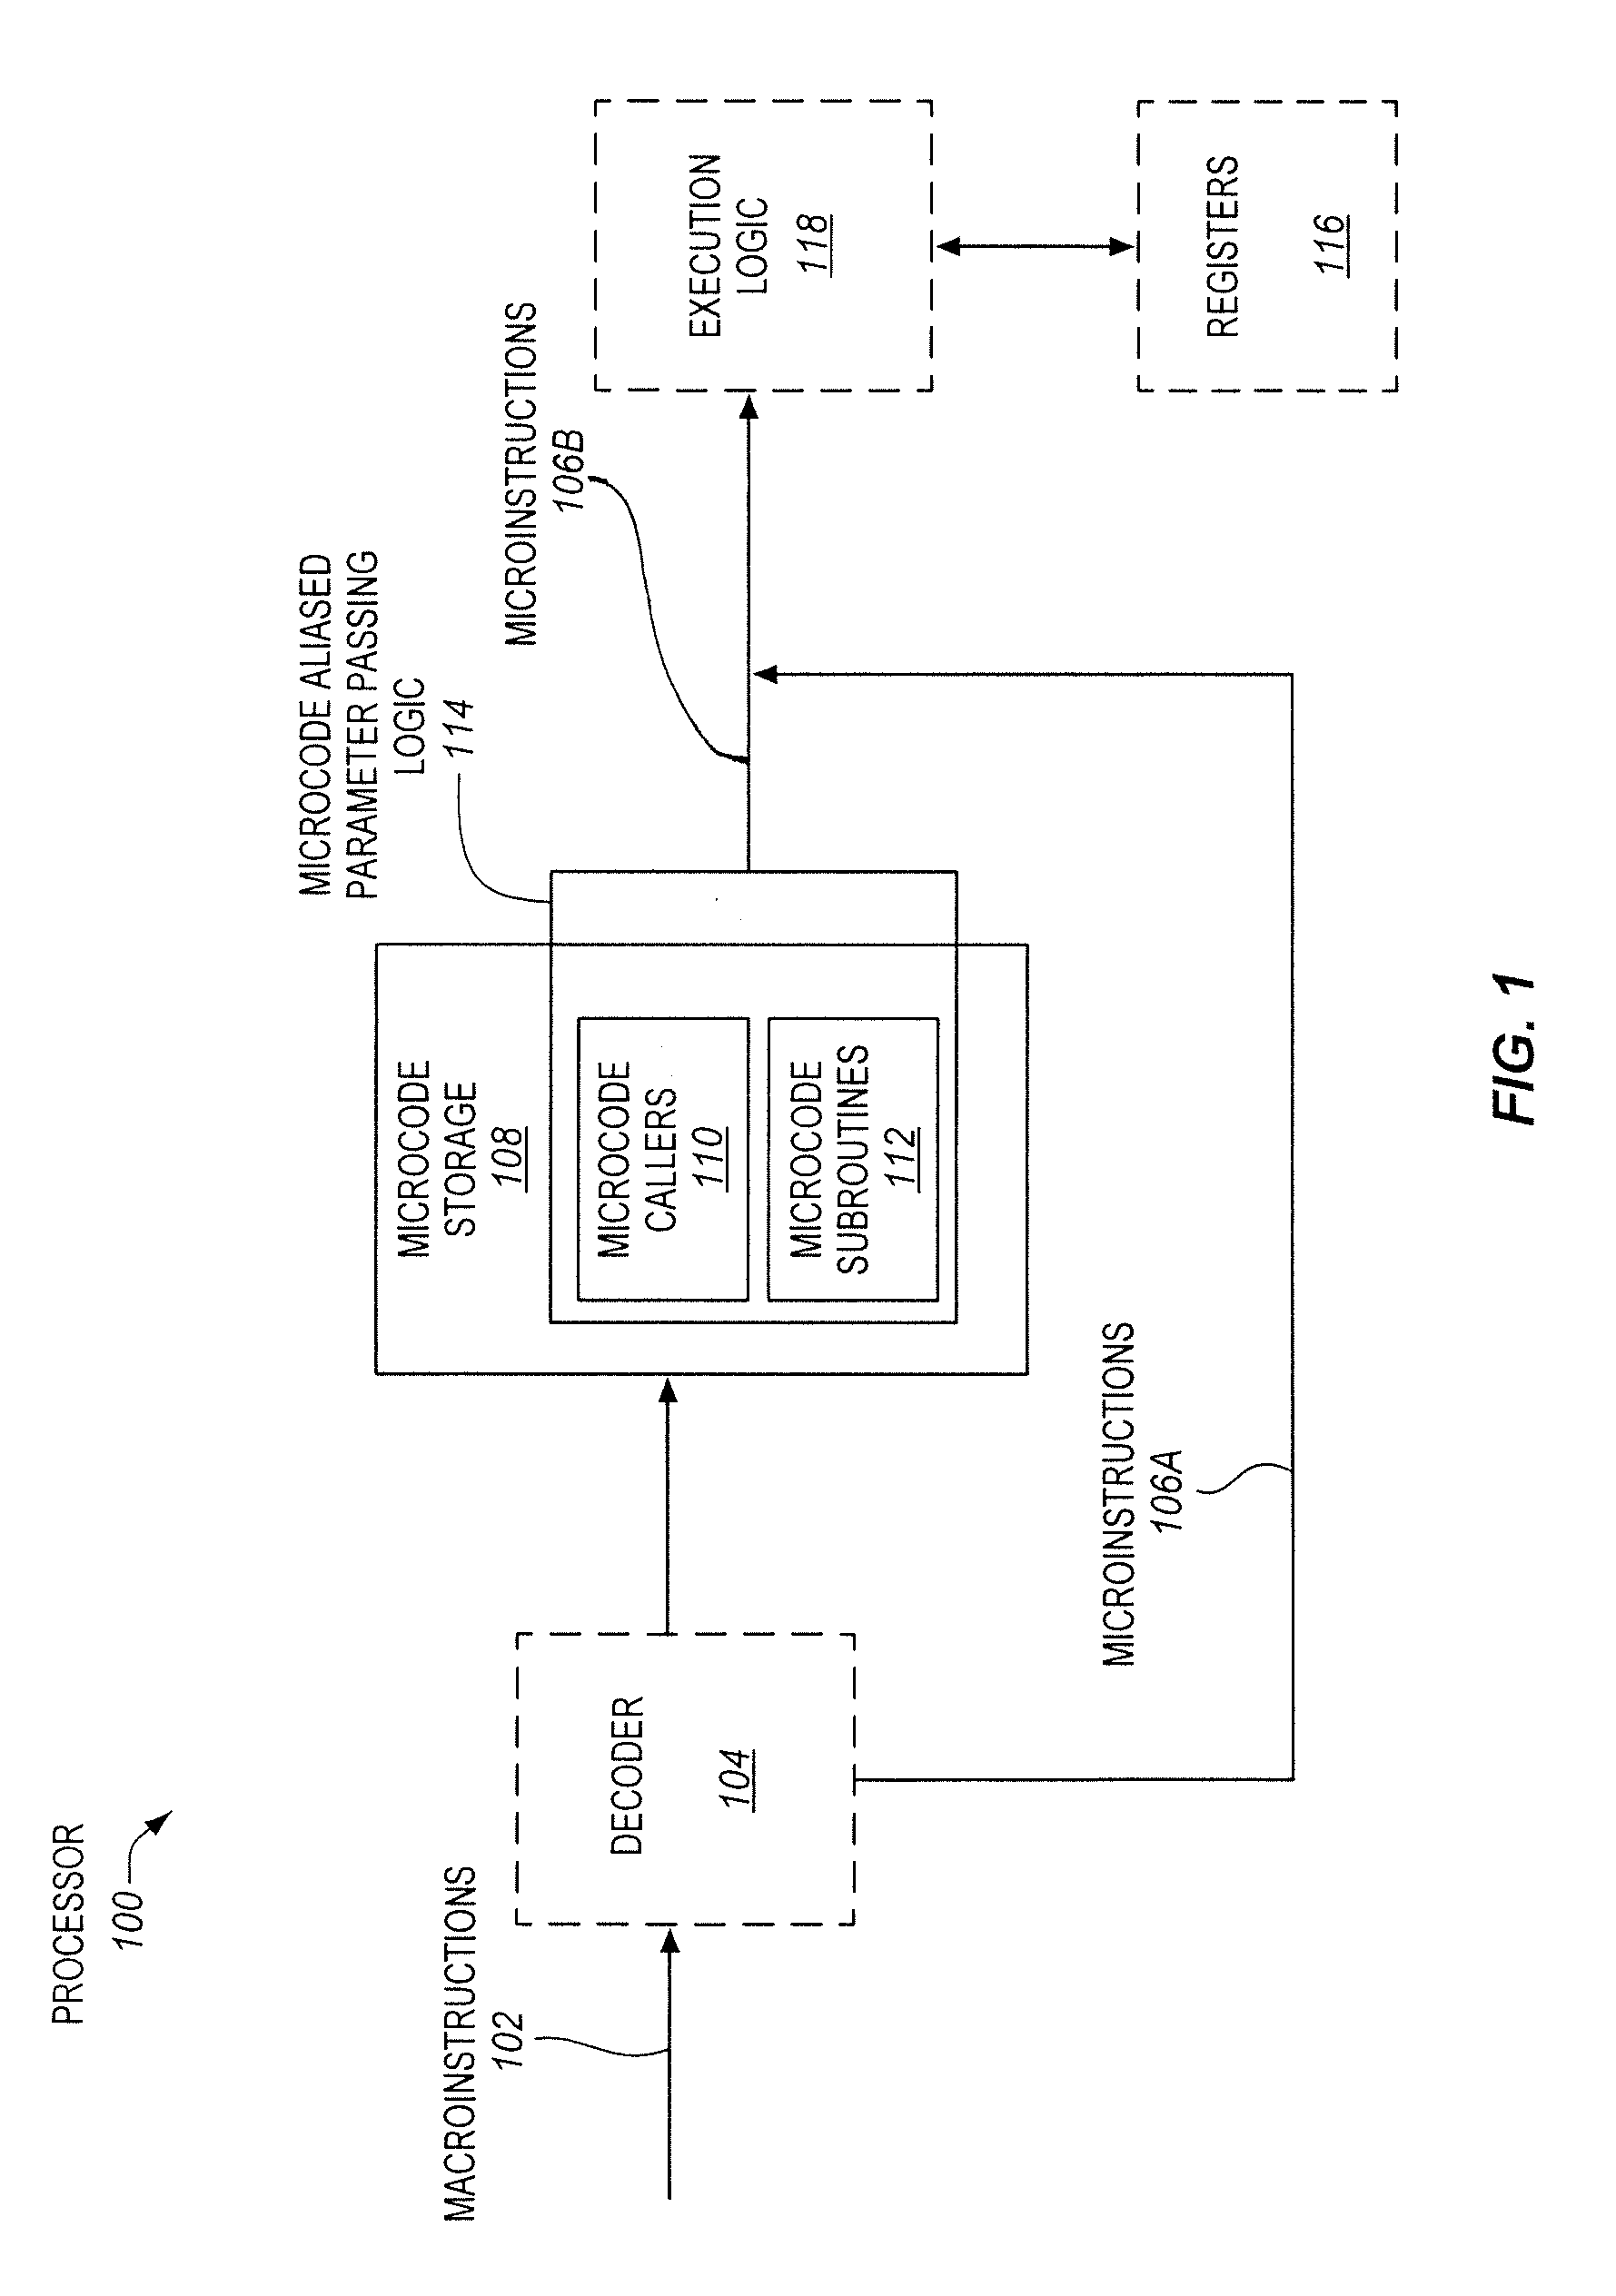 Aliased Parameter Passing Between Microcode Callers and Microcode Subroutines